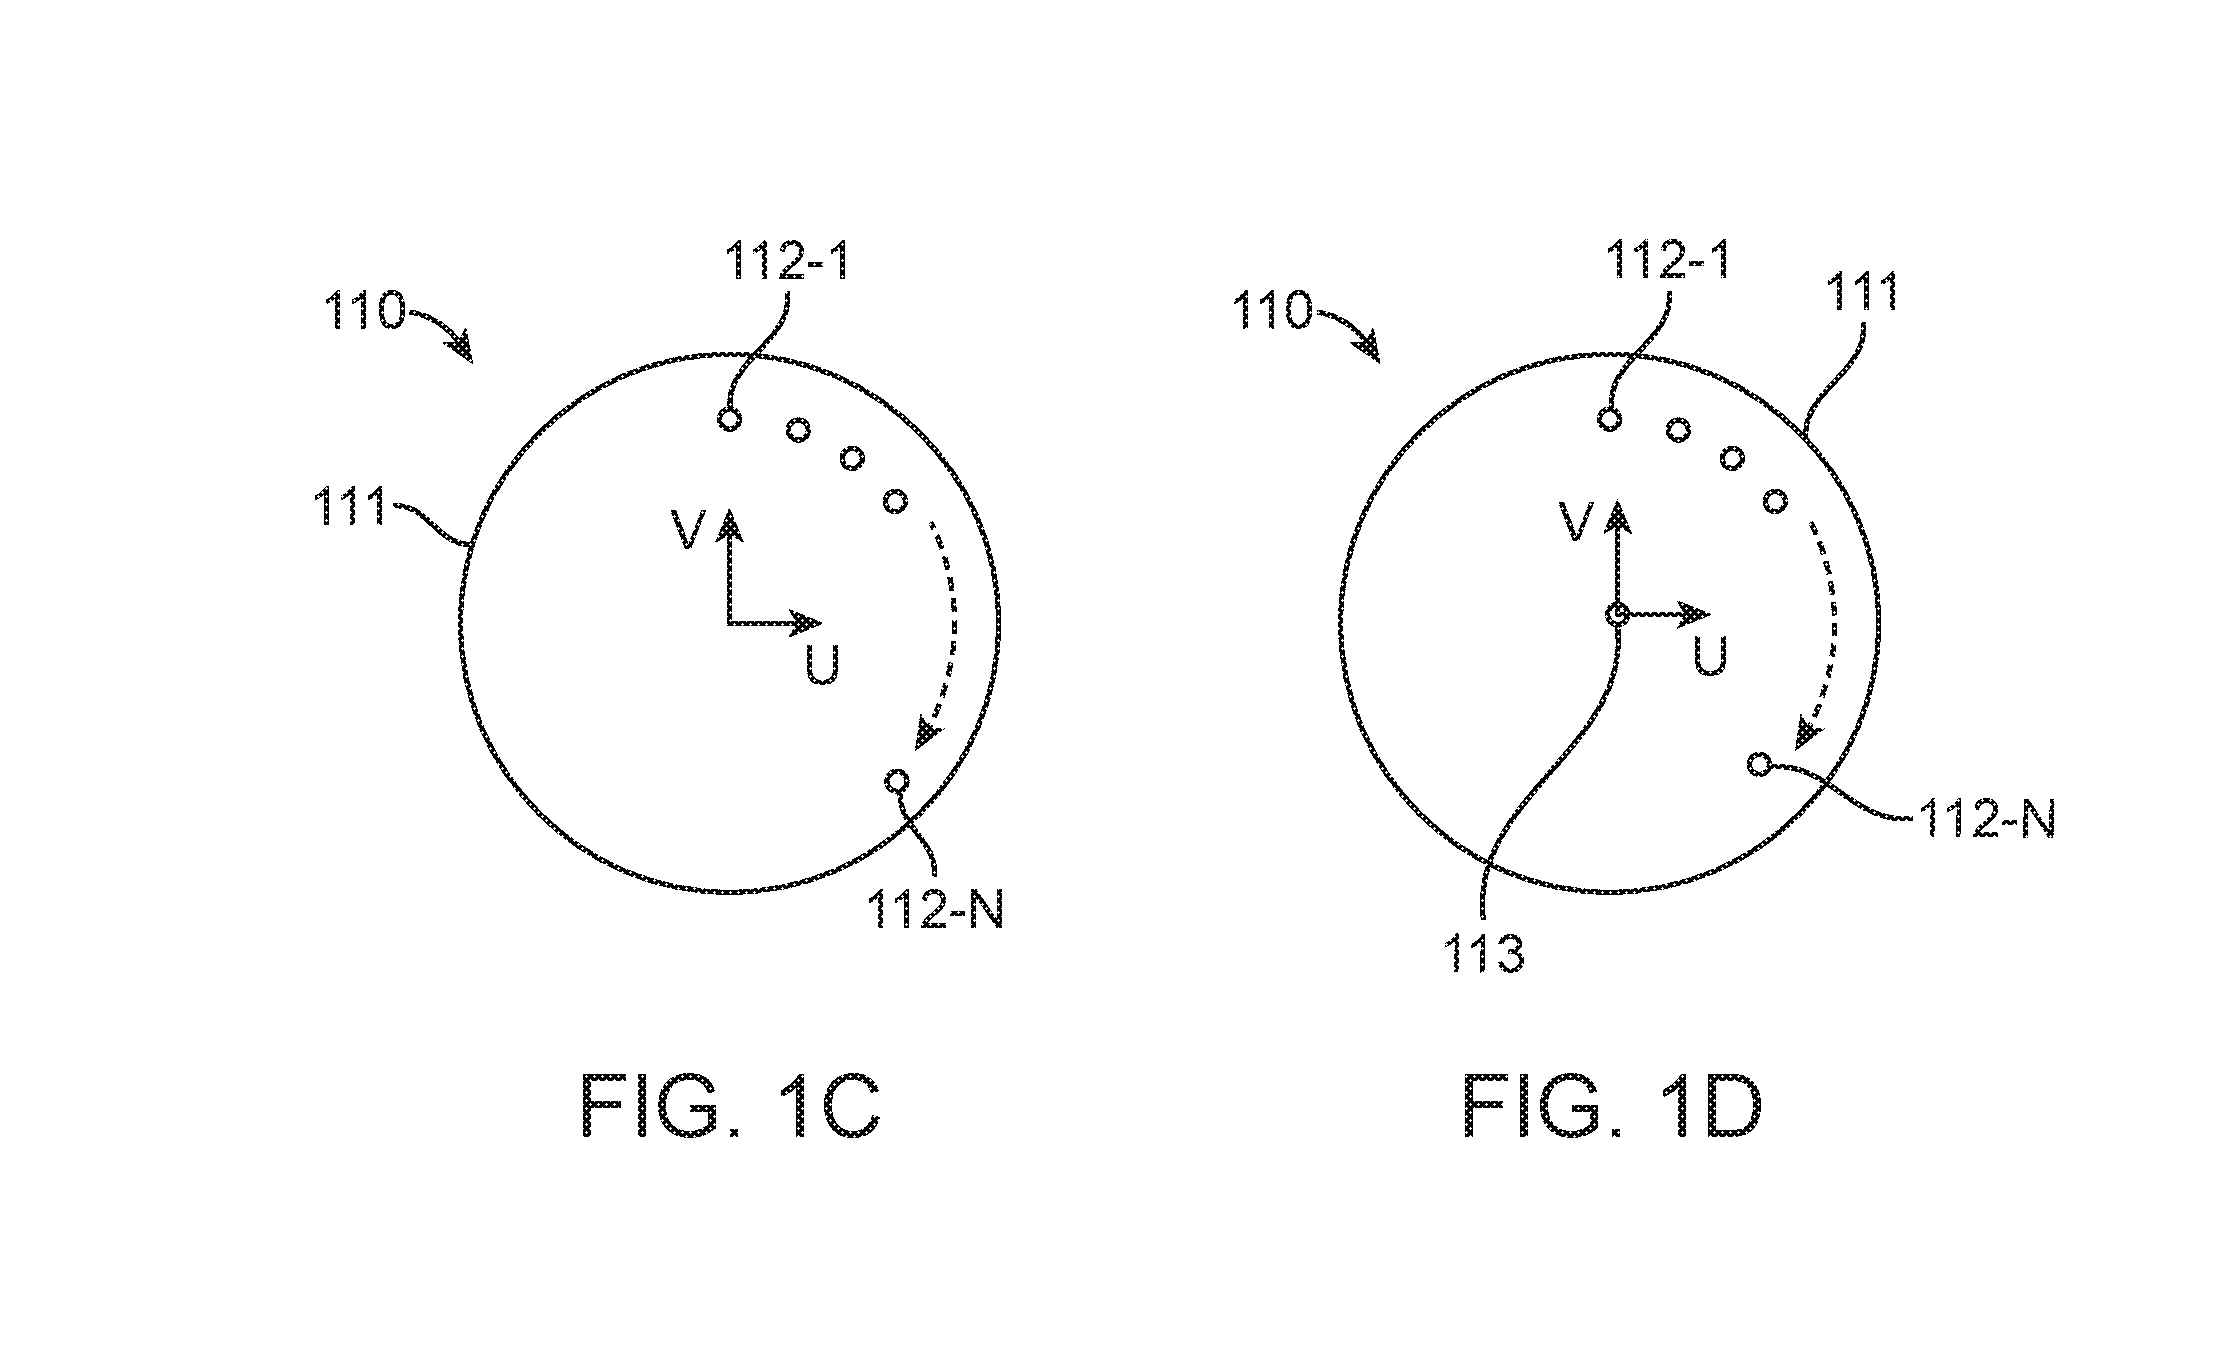 Systems and methods for transmission and reception of radio waves in a focal plane antenna array